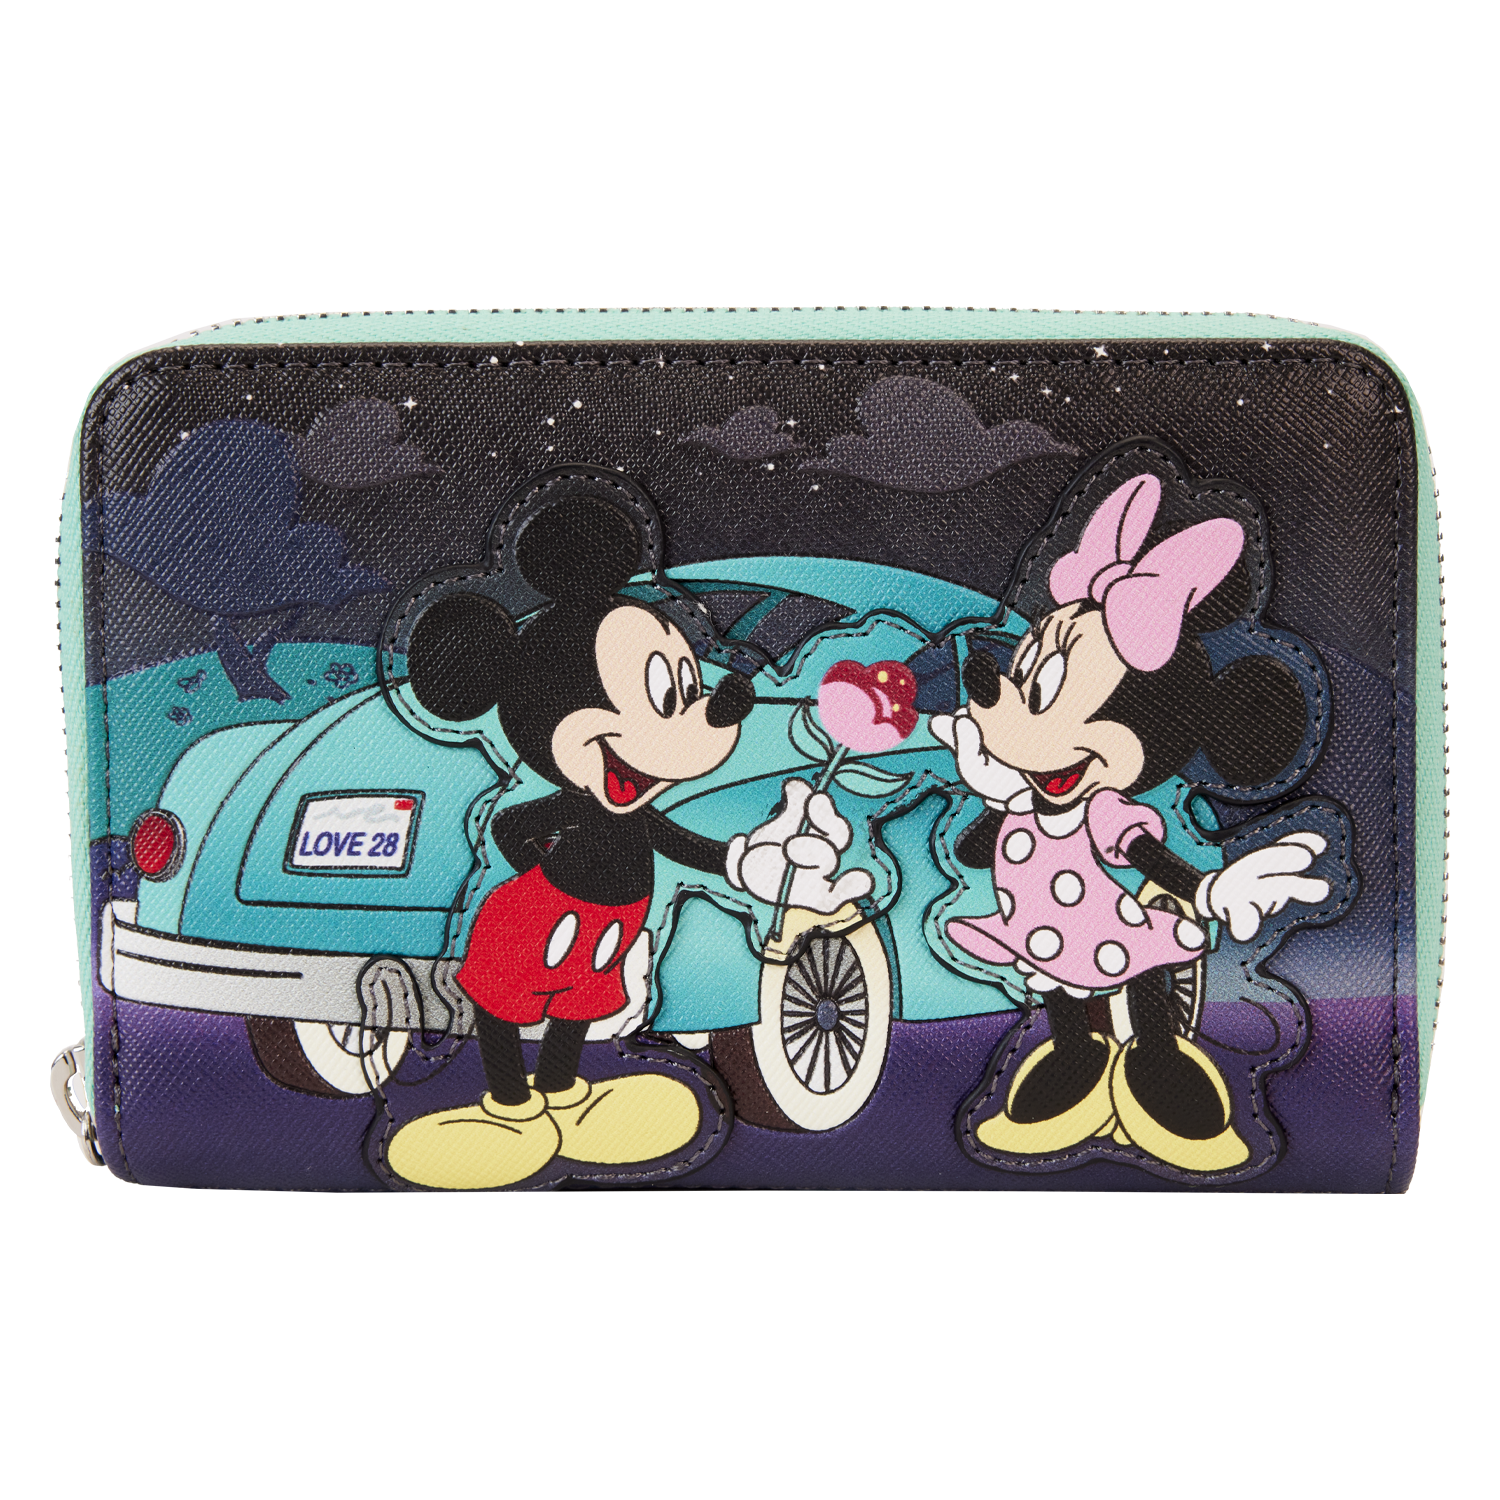 Buy Mickey & Minnie Date Night Drive-In Zip Around Wallet at Loungefly.